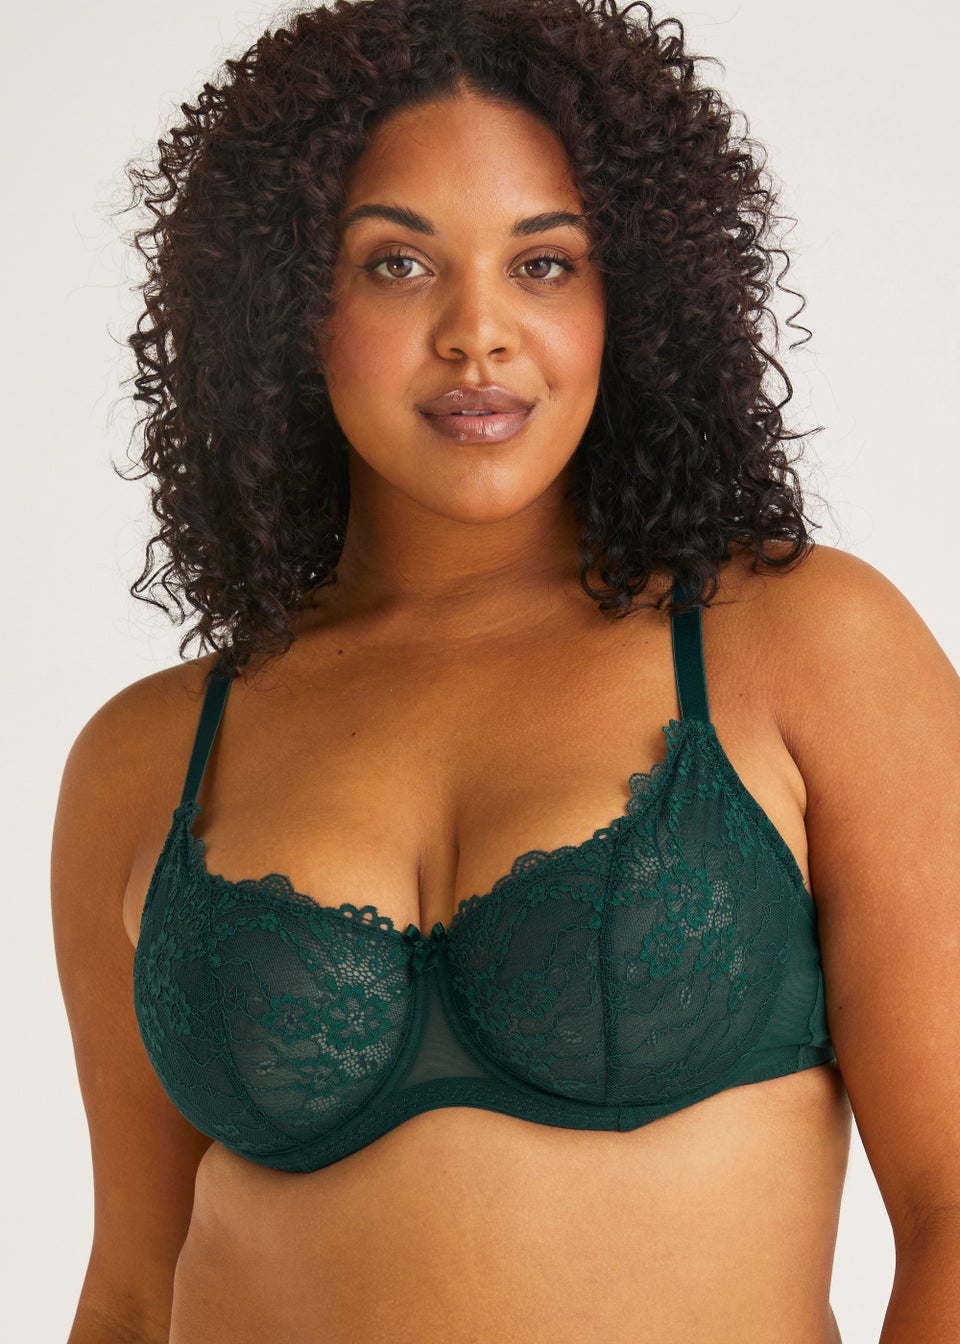 Ivory Rose Curve lace lingerie set in emerald green